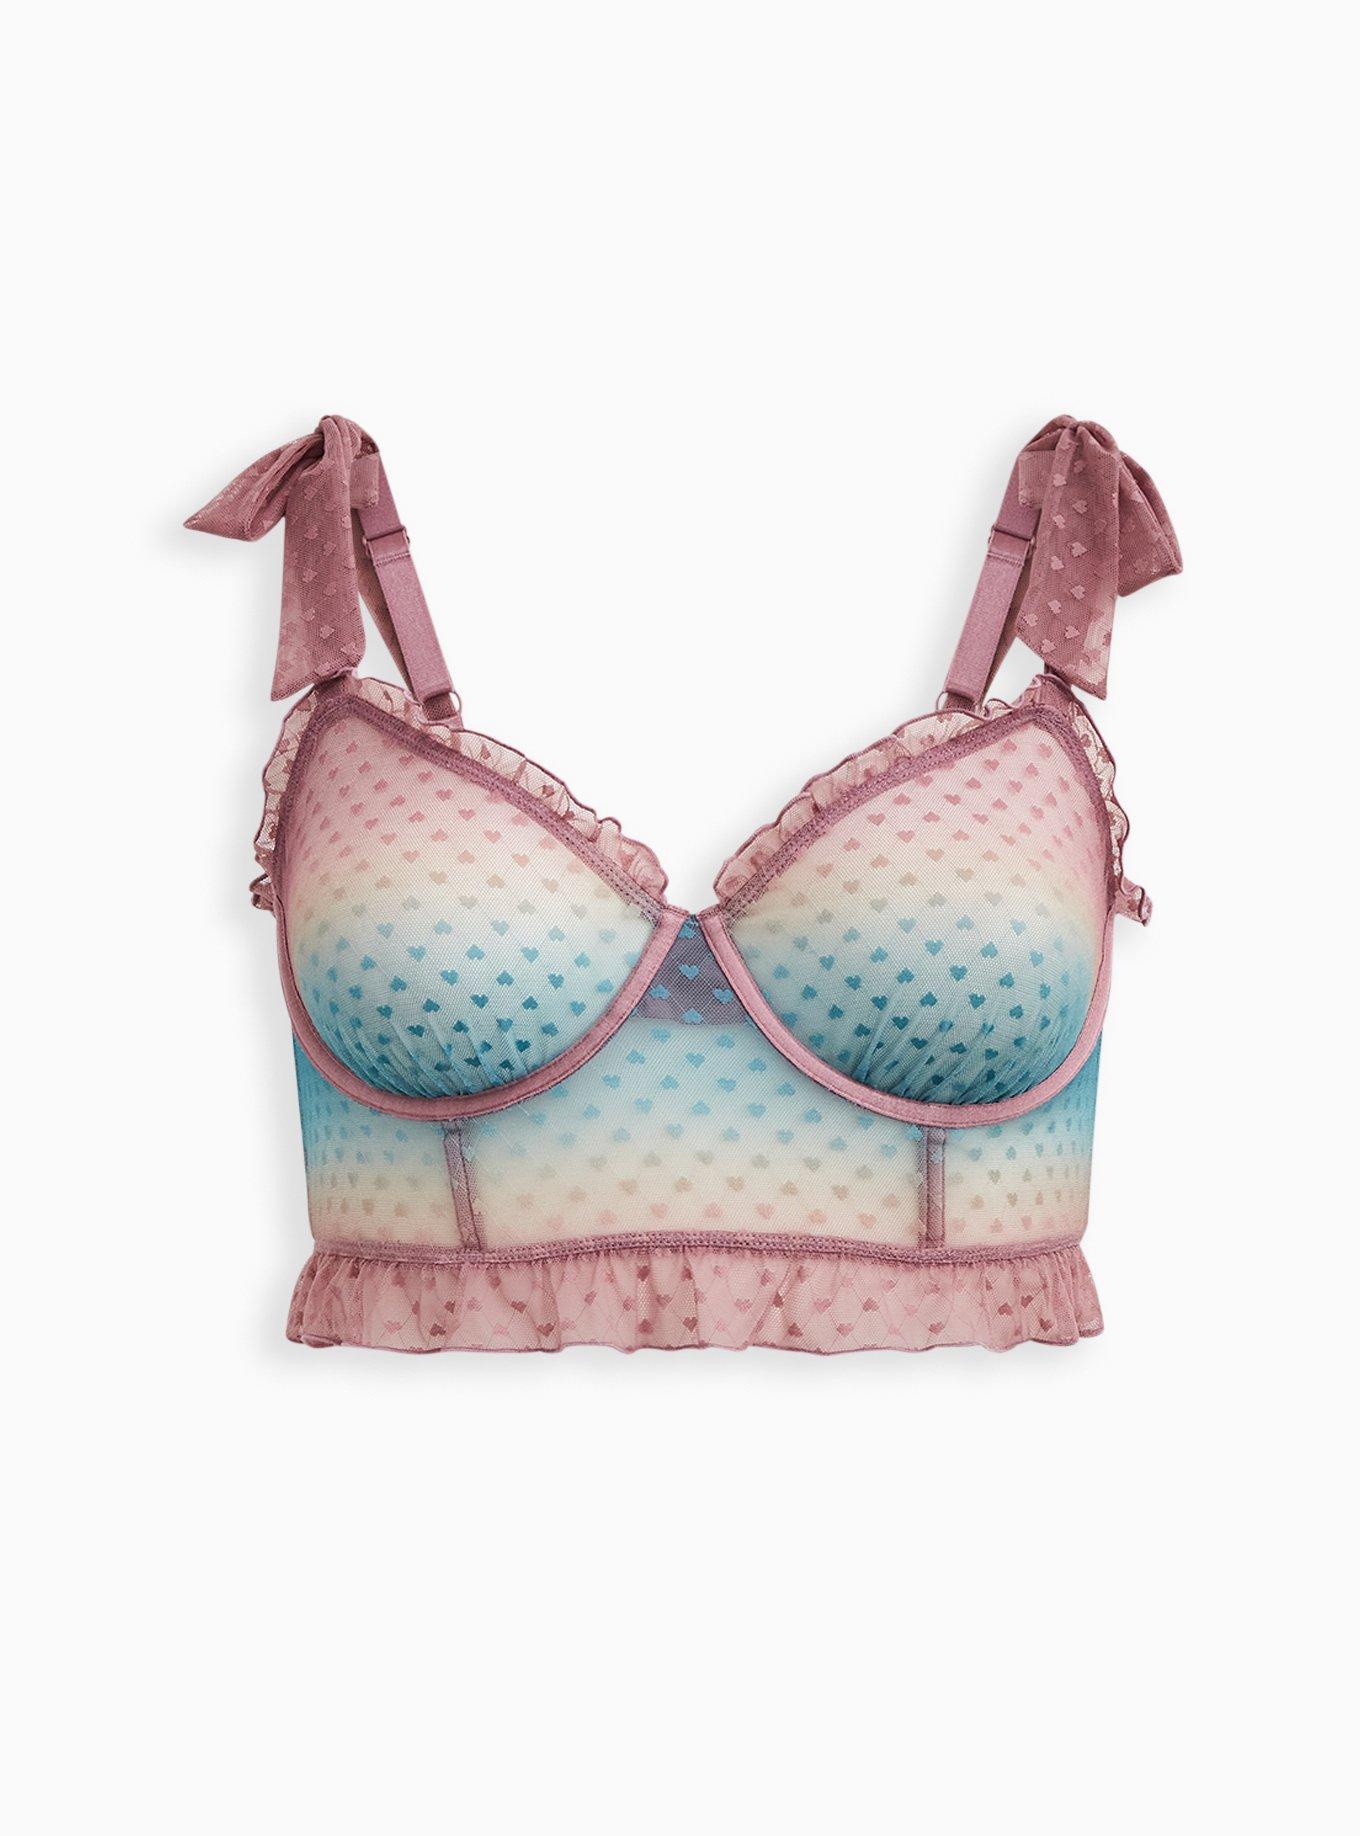 Plus Size - French Hearts 3 Piece Cup Bralette - Torrid